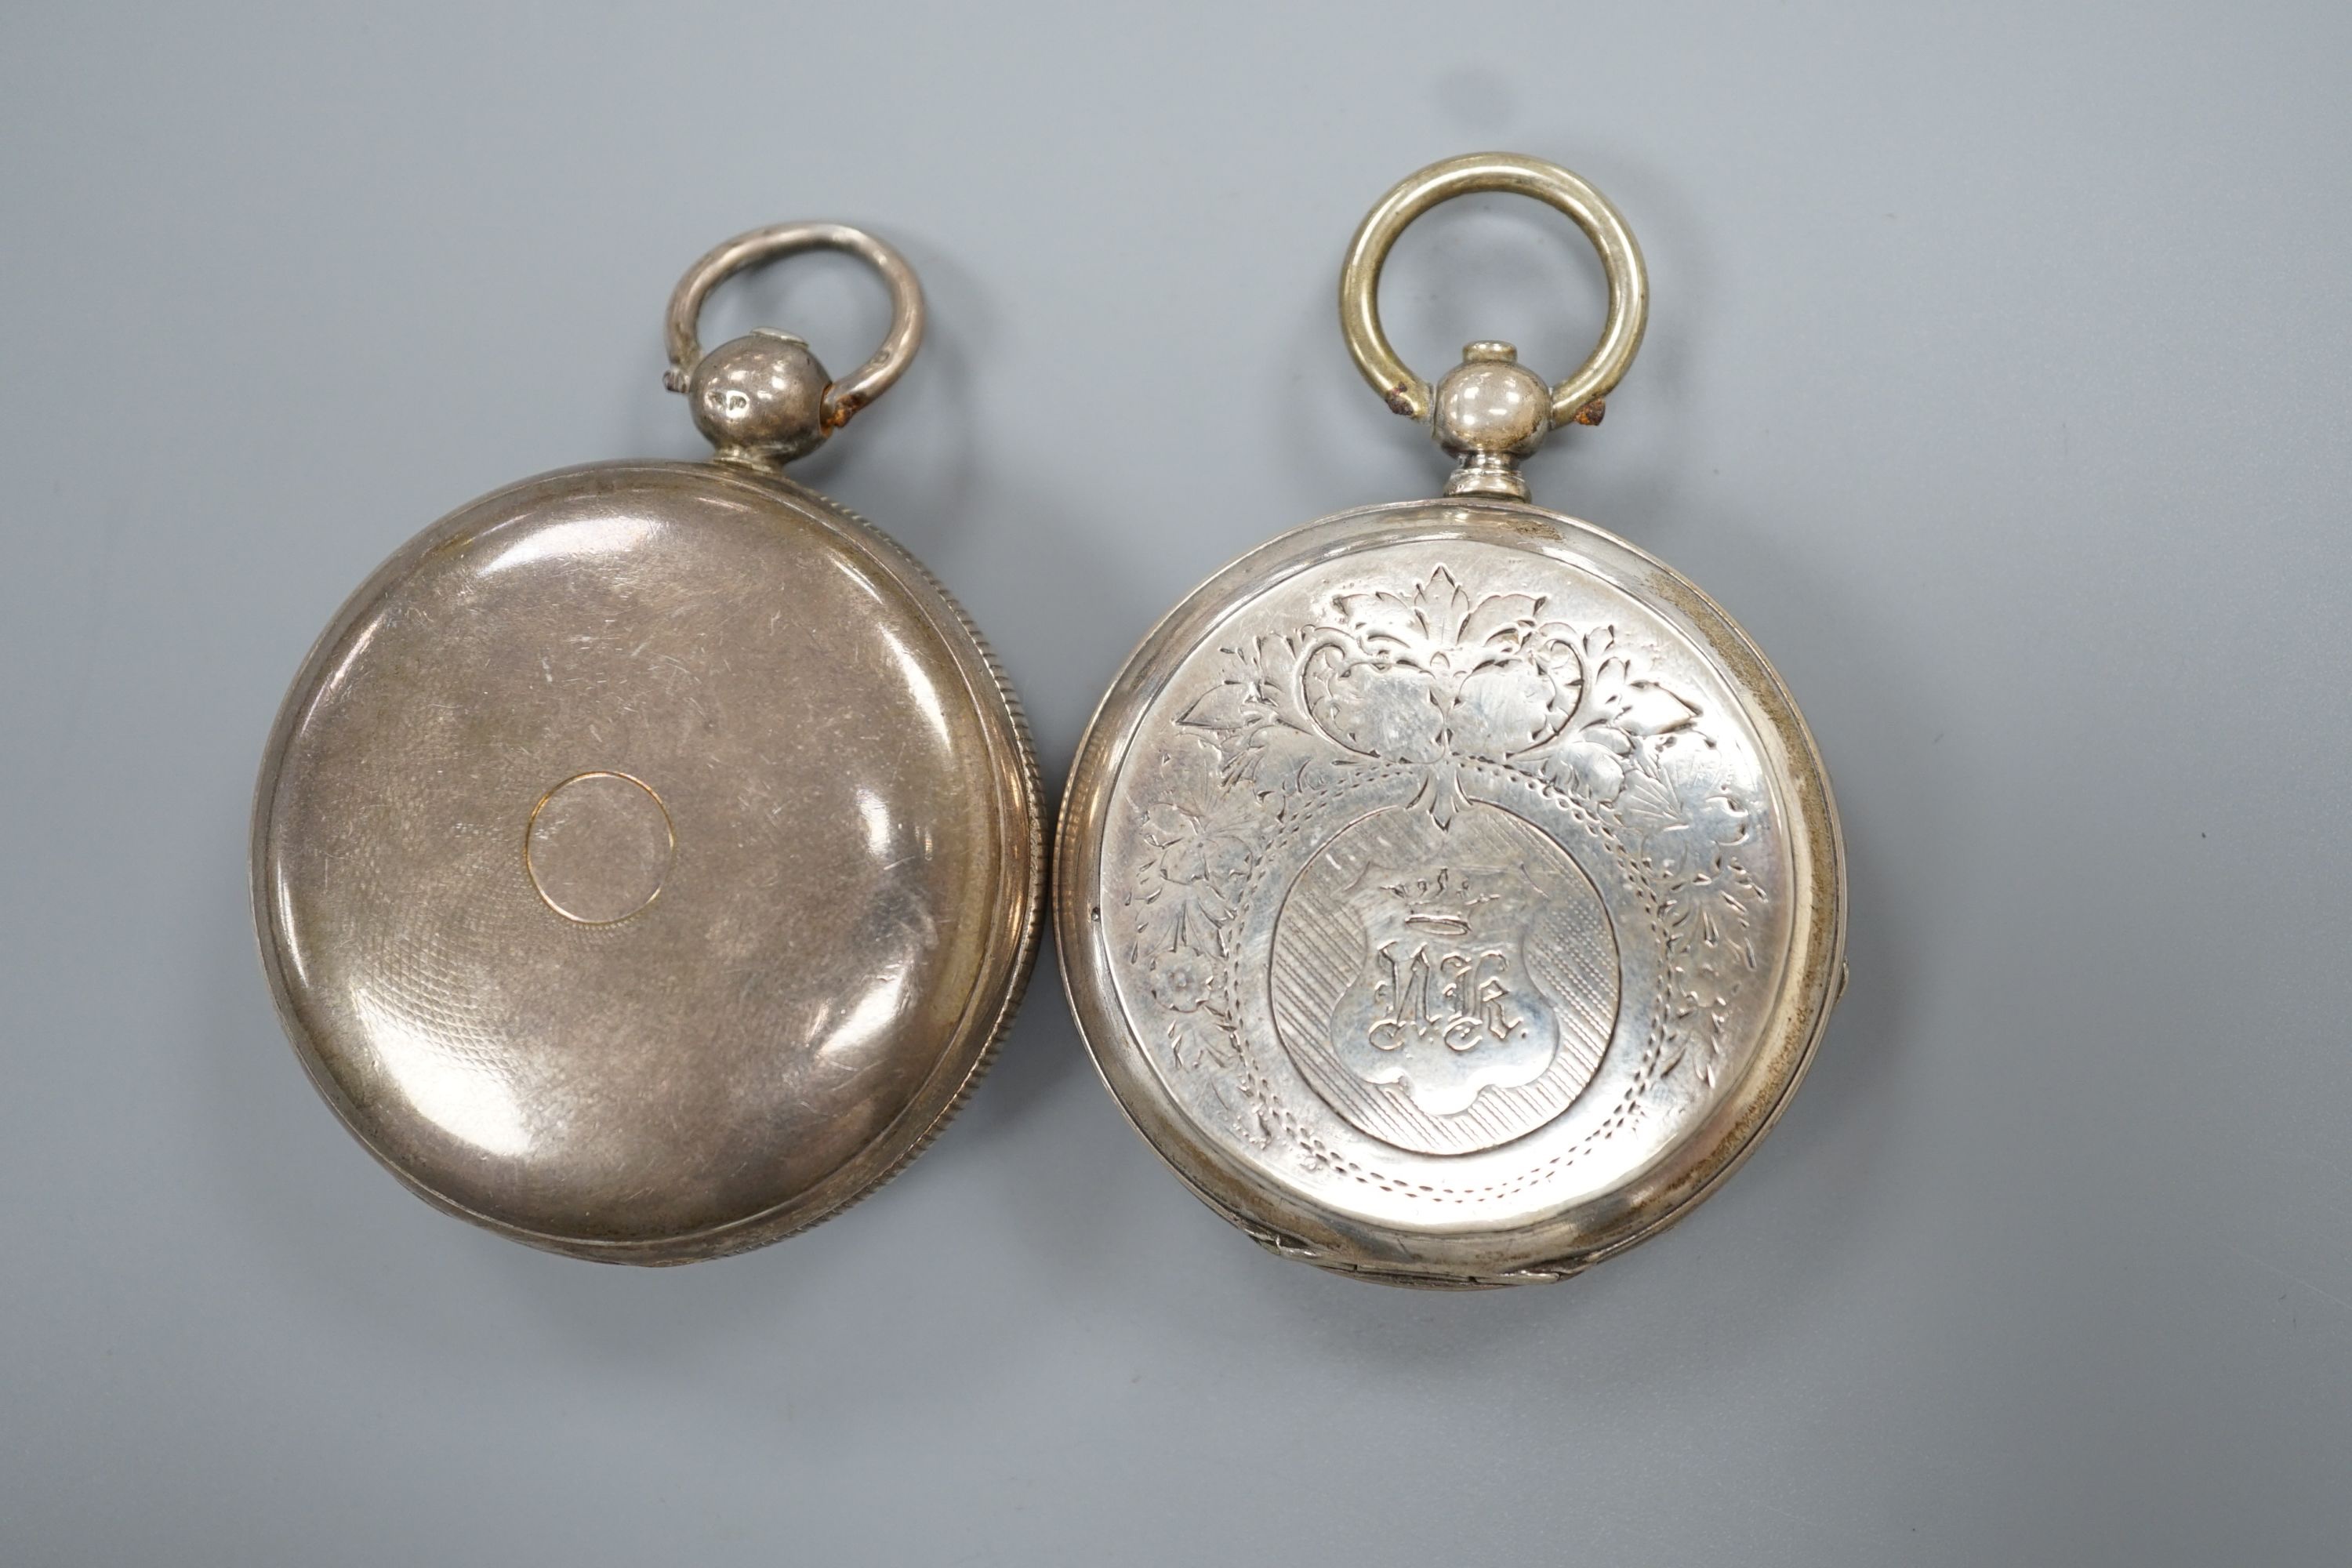 A 19th century white metal hunter pocket watch, by Robert Roskell, Liverpool, engraved with train on a bridge and one other silver hunter pocket watch.